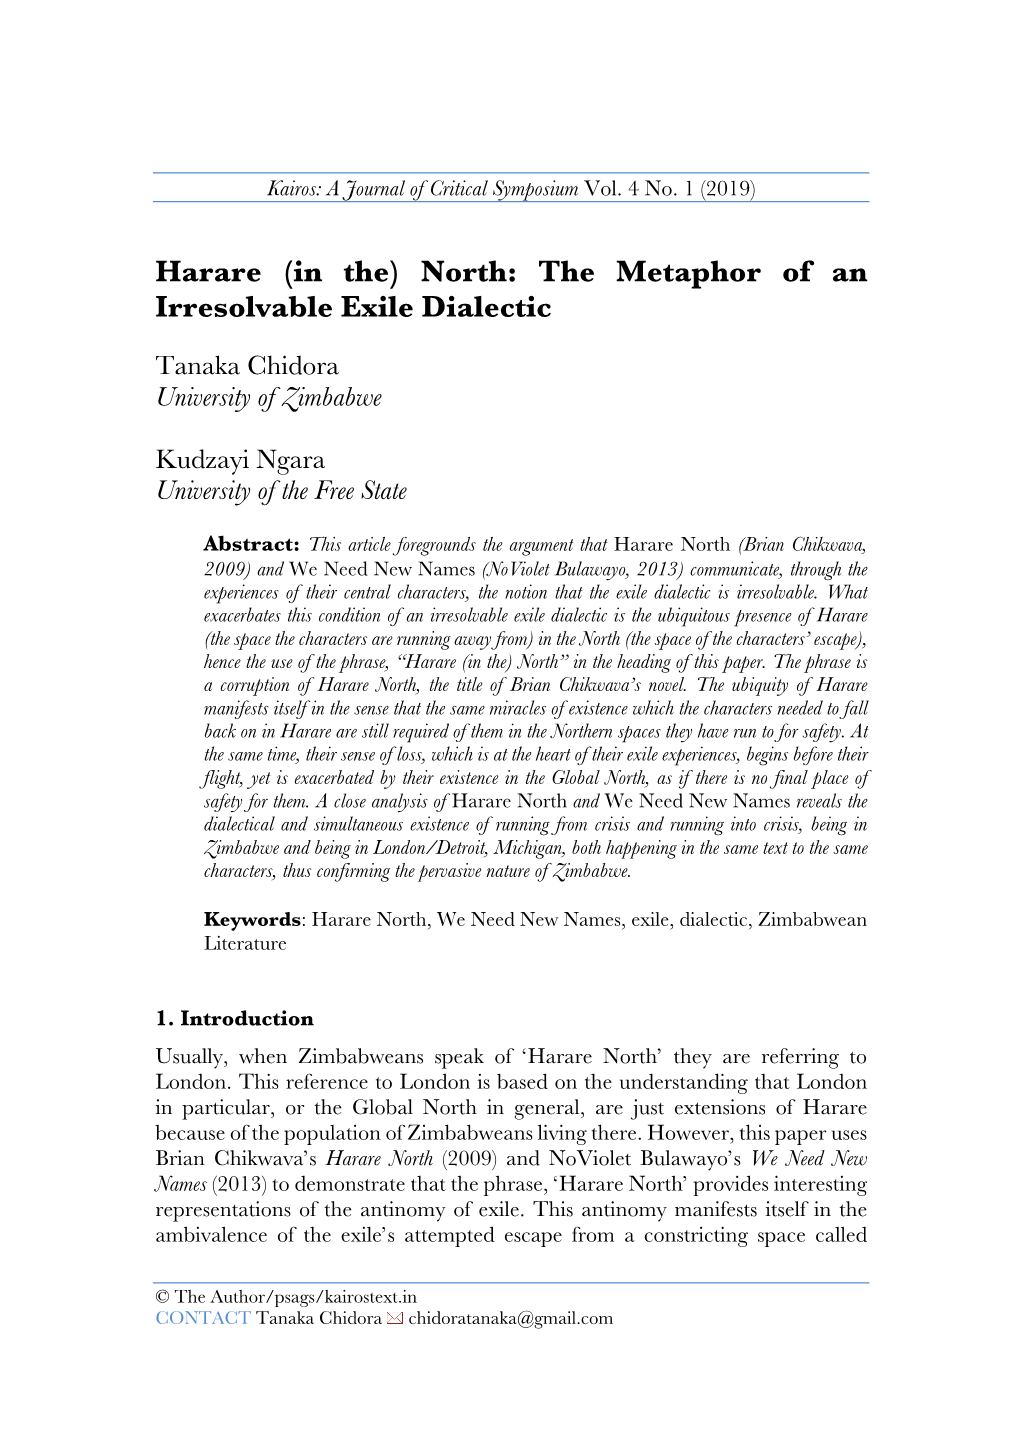 Harare (In The) North: the Metaphor of an Irresolvable Exile Dialectic